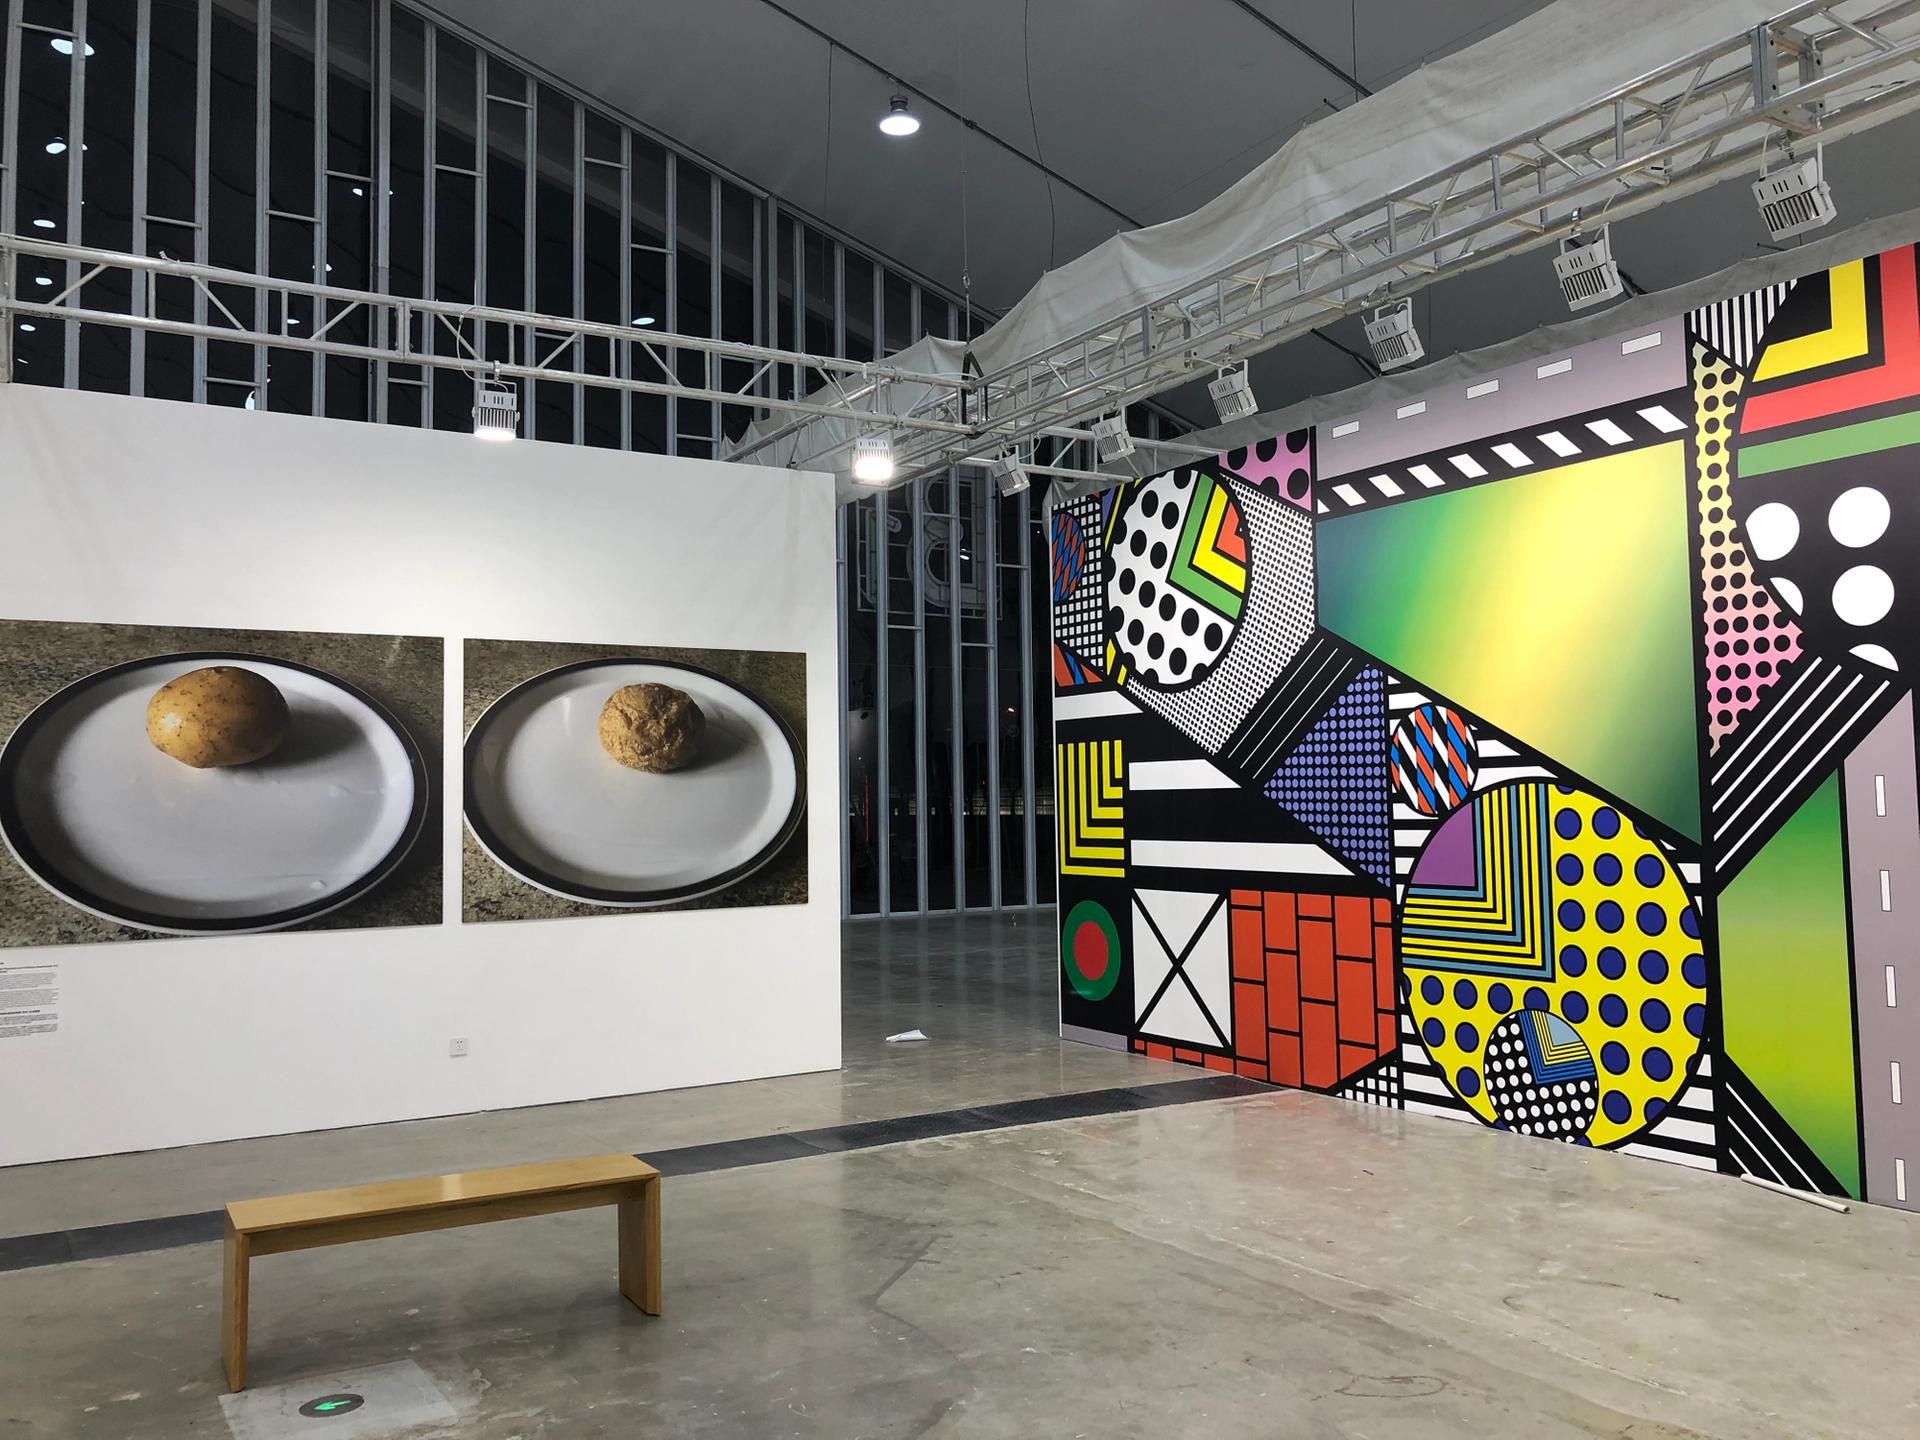 SoAH Urgency of the Arts Research exhibition, Future Lab, Shanghai, November 2019 Image shows work by recent graduates, Dr Ruidi Mu and Dr Kyung Hwa Shon